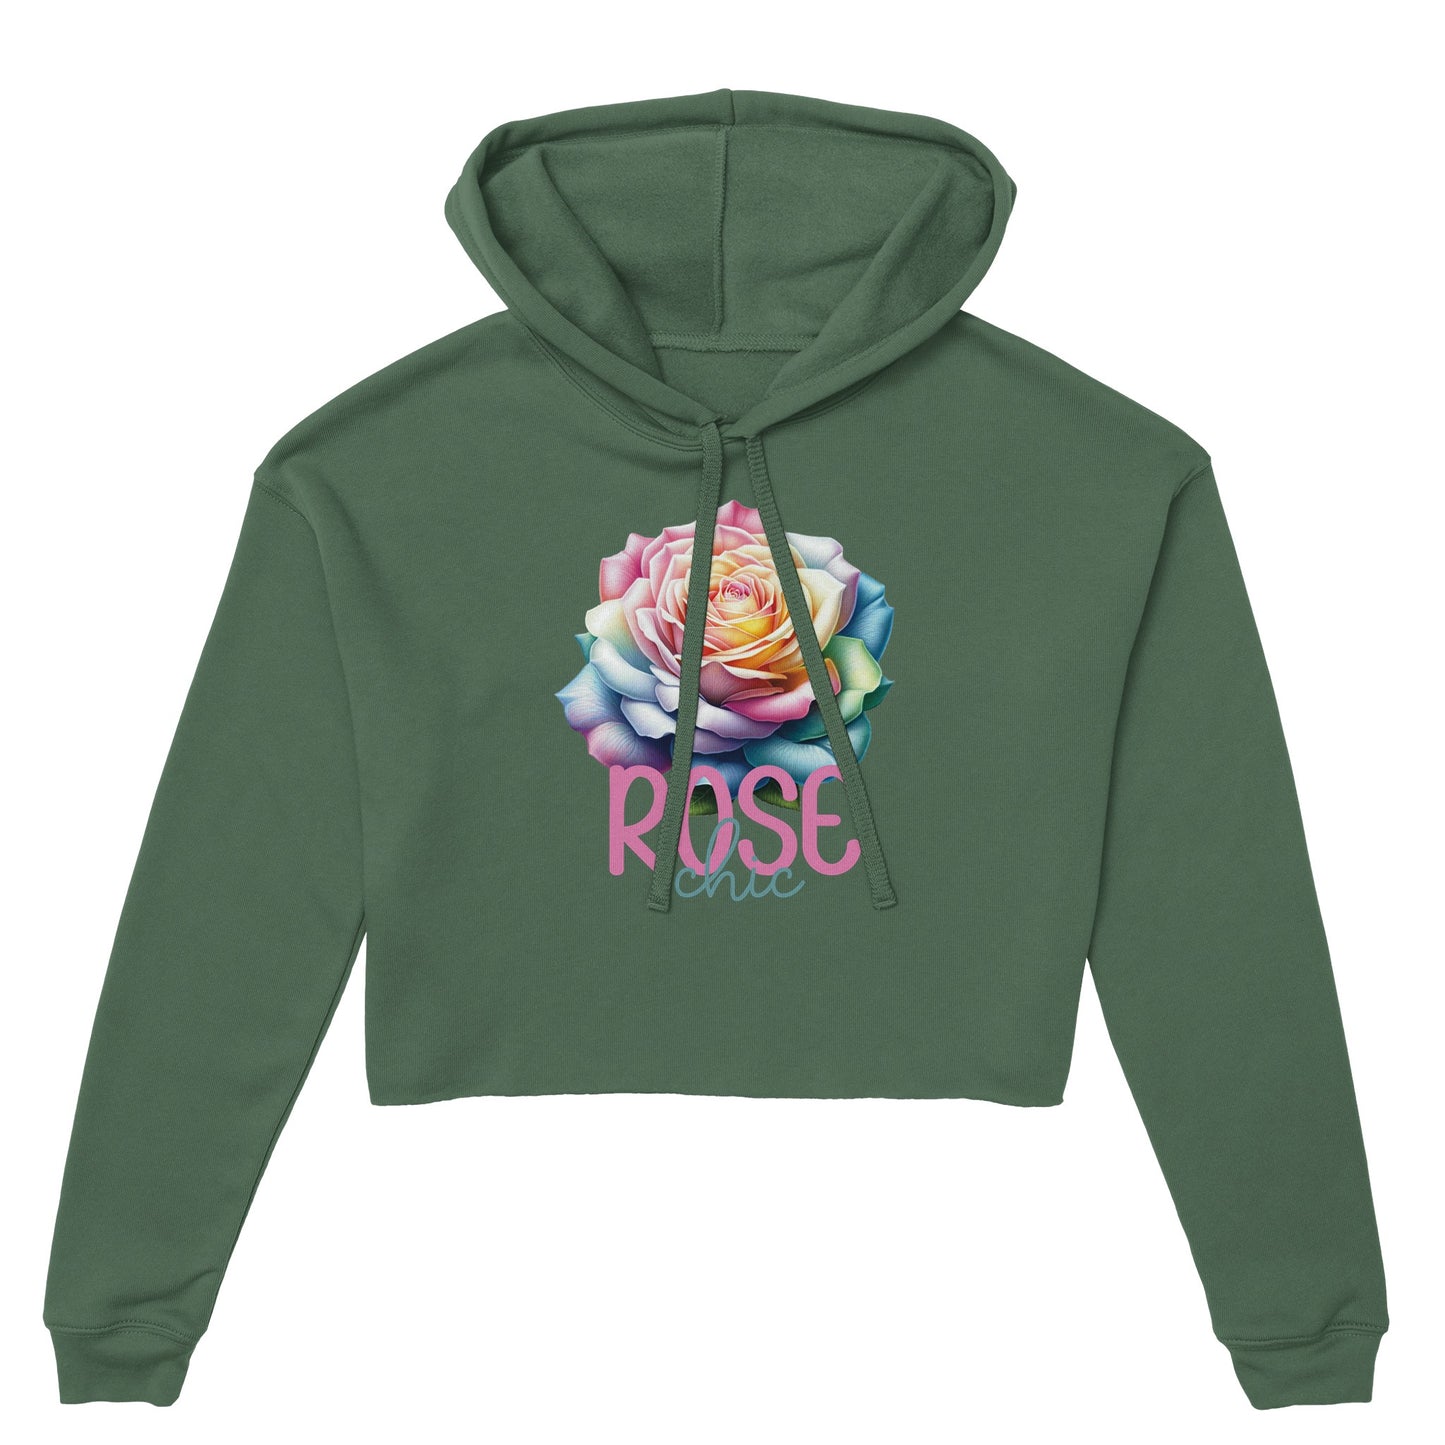 Women's Cropped Hoodie | ROSE chic design